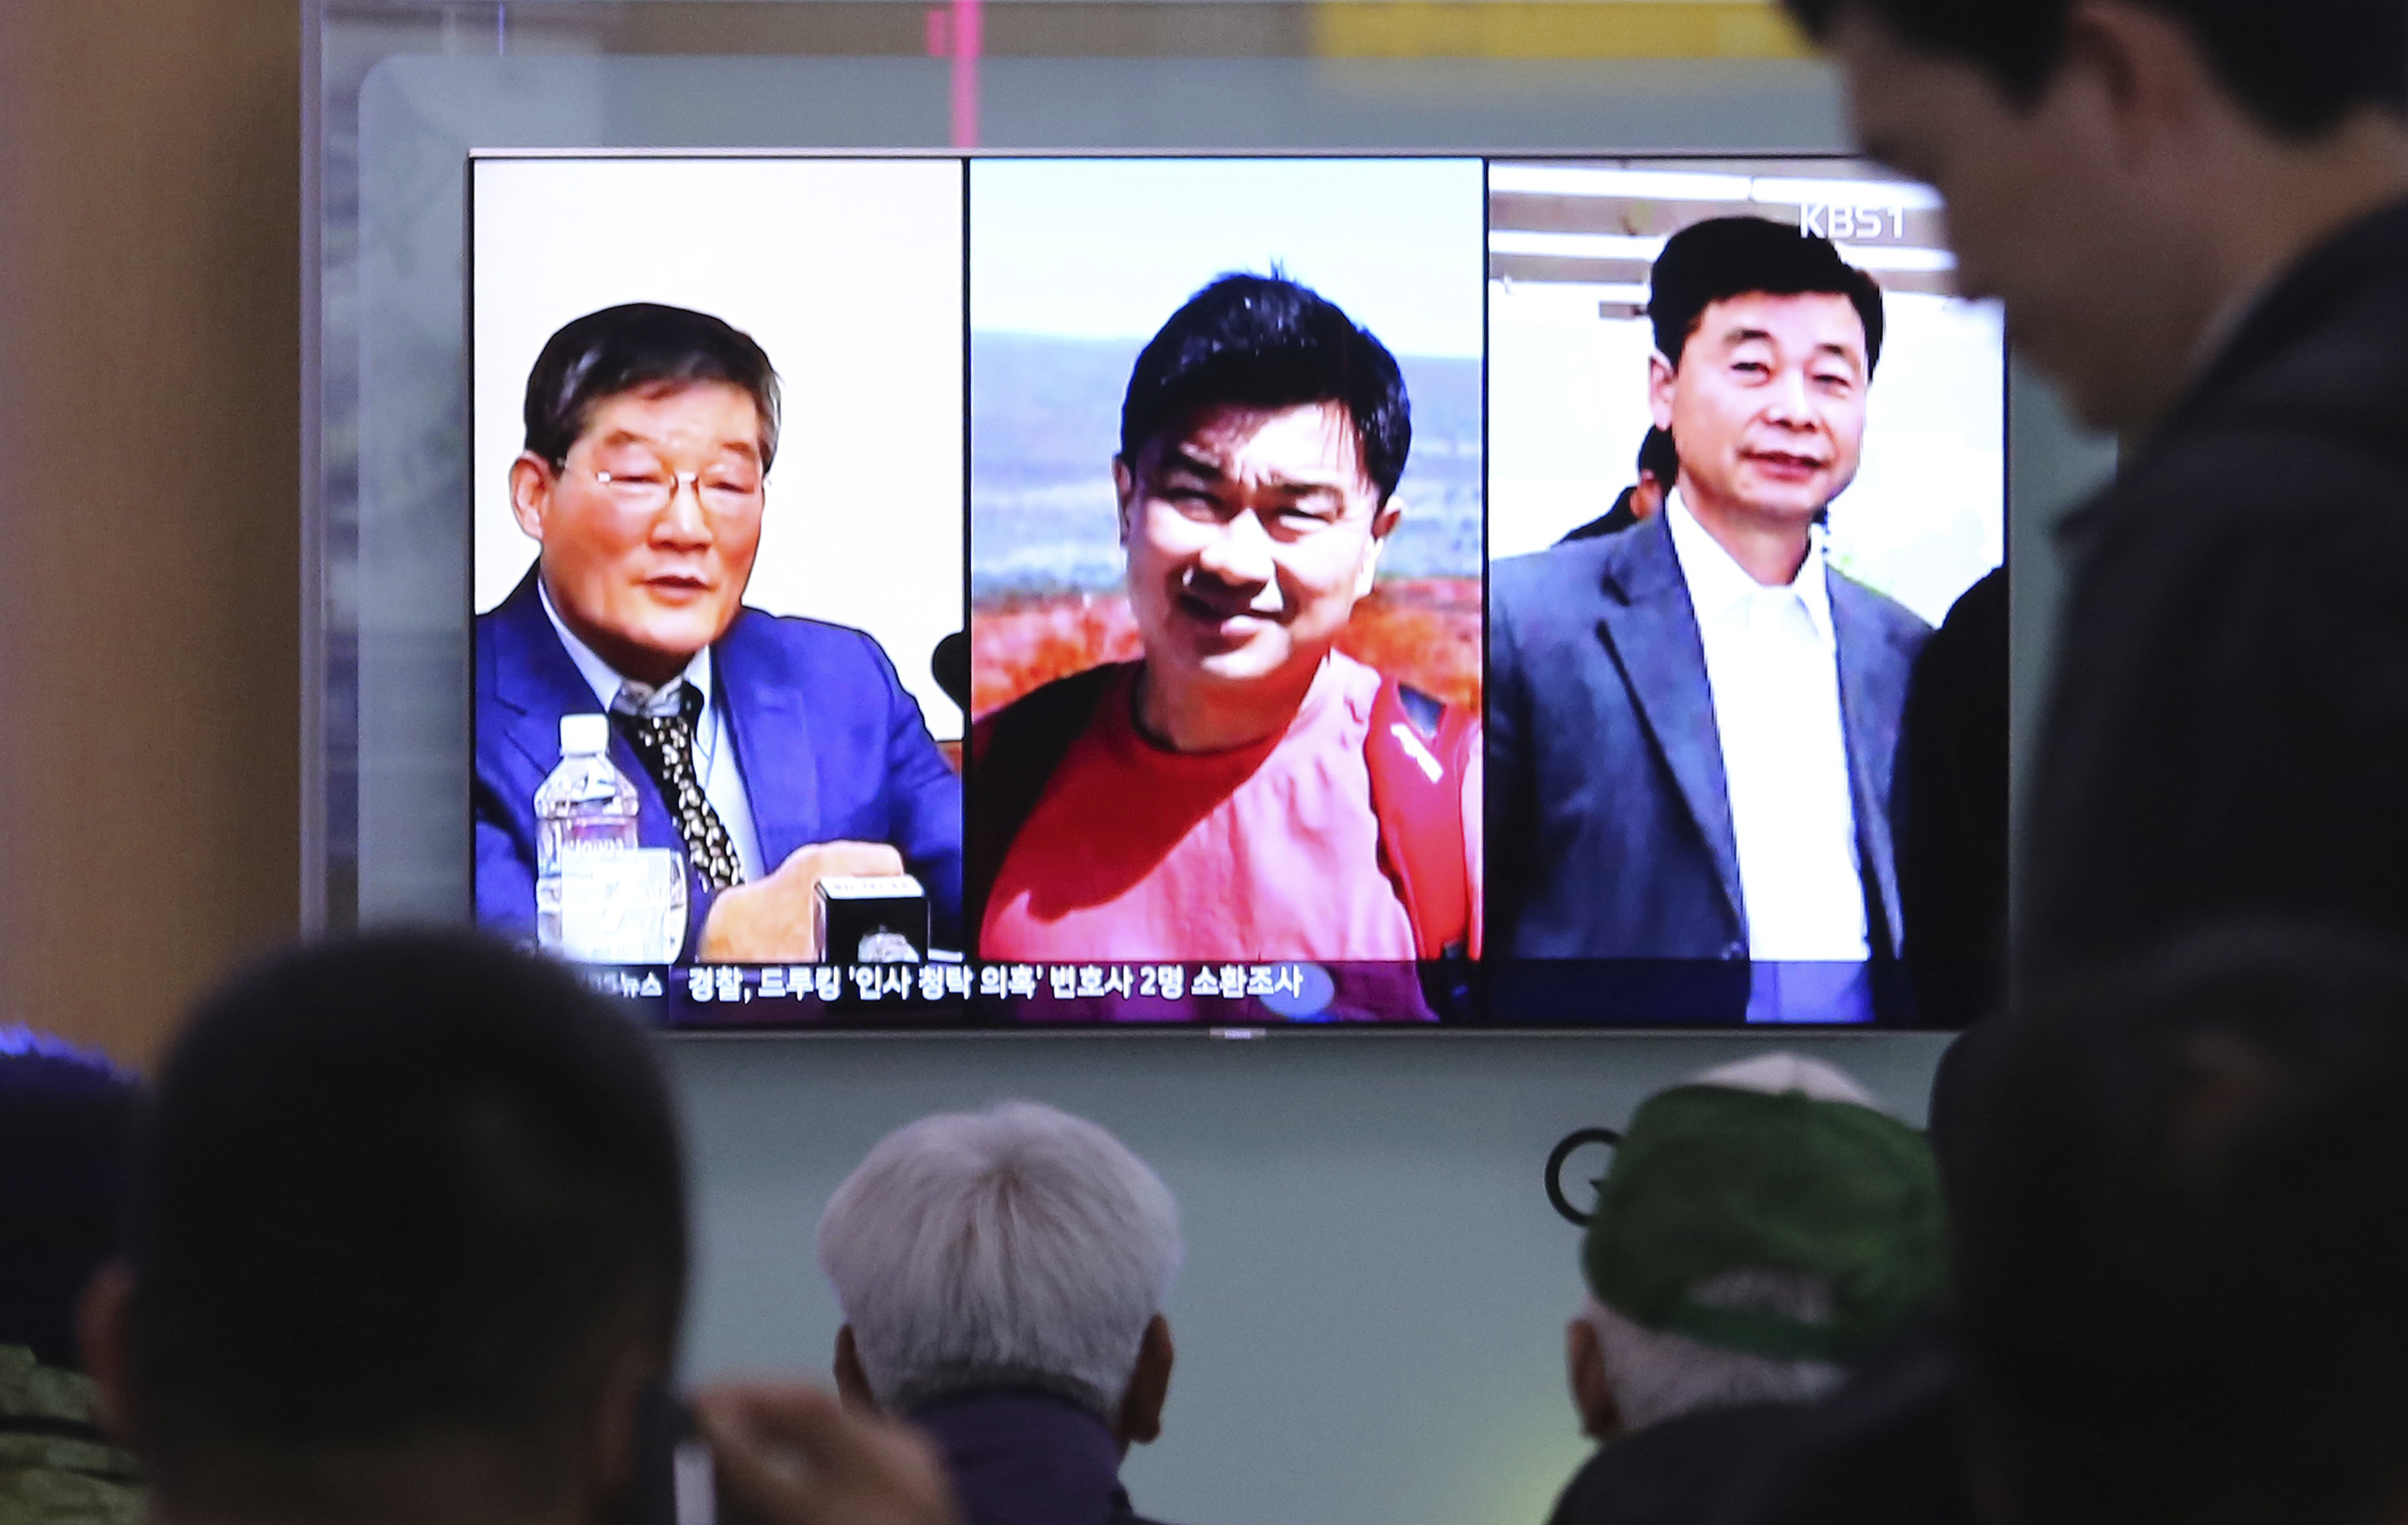 FILE - In this May 3, 2018 photo, people watch a TV news report on screen, showing portraits of three Americans, Kim Dong Chul, left, Tony Kim and Kim Hak Song, right, detained in the North Korea, at the Seoul Railway Station in Seoul, South Korea. President Donald Trump says Secretary of State Mike Pompeo is on his way back from North Korea with three American detainees, saying they 